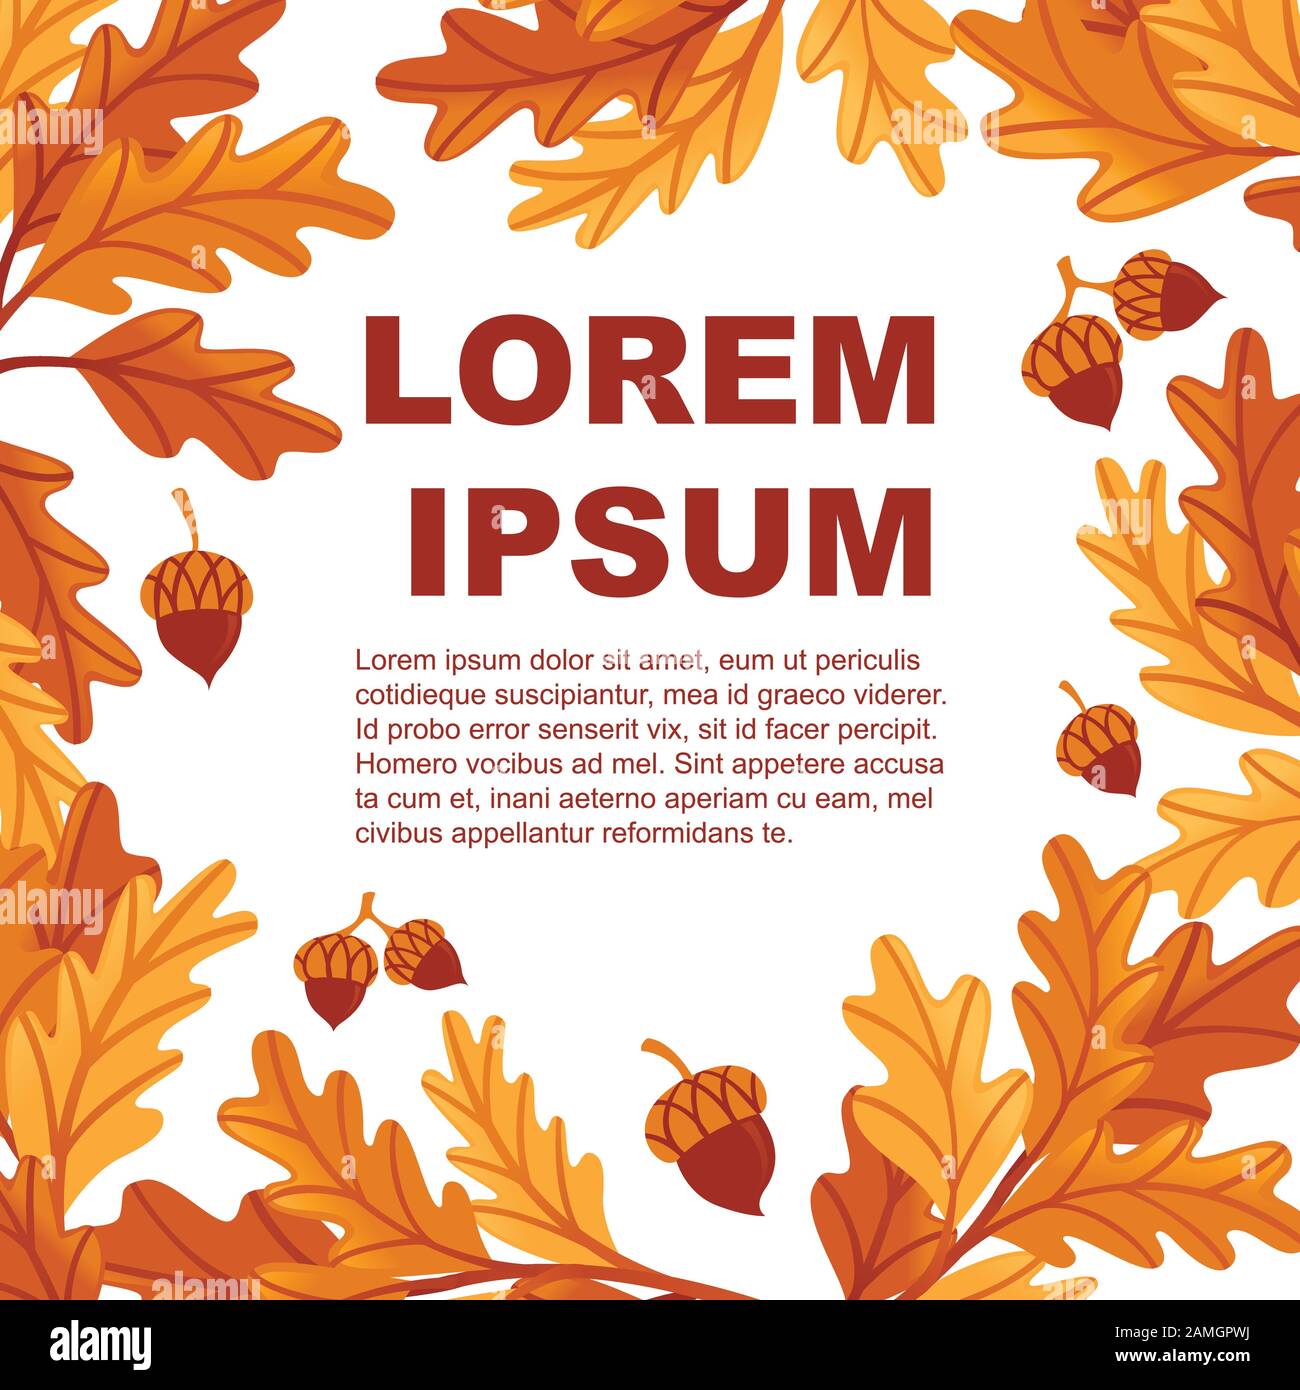 Flyer design with various oak autumn leaves with acorn flat vector illustration on white background. Stock Vector